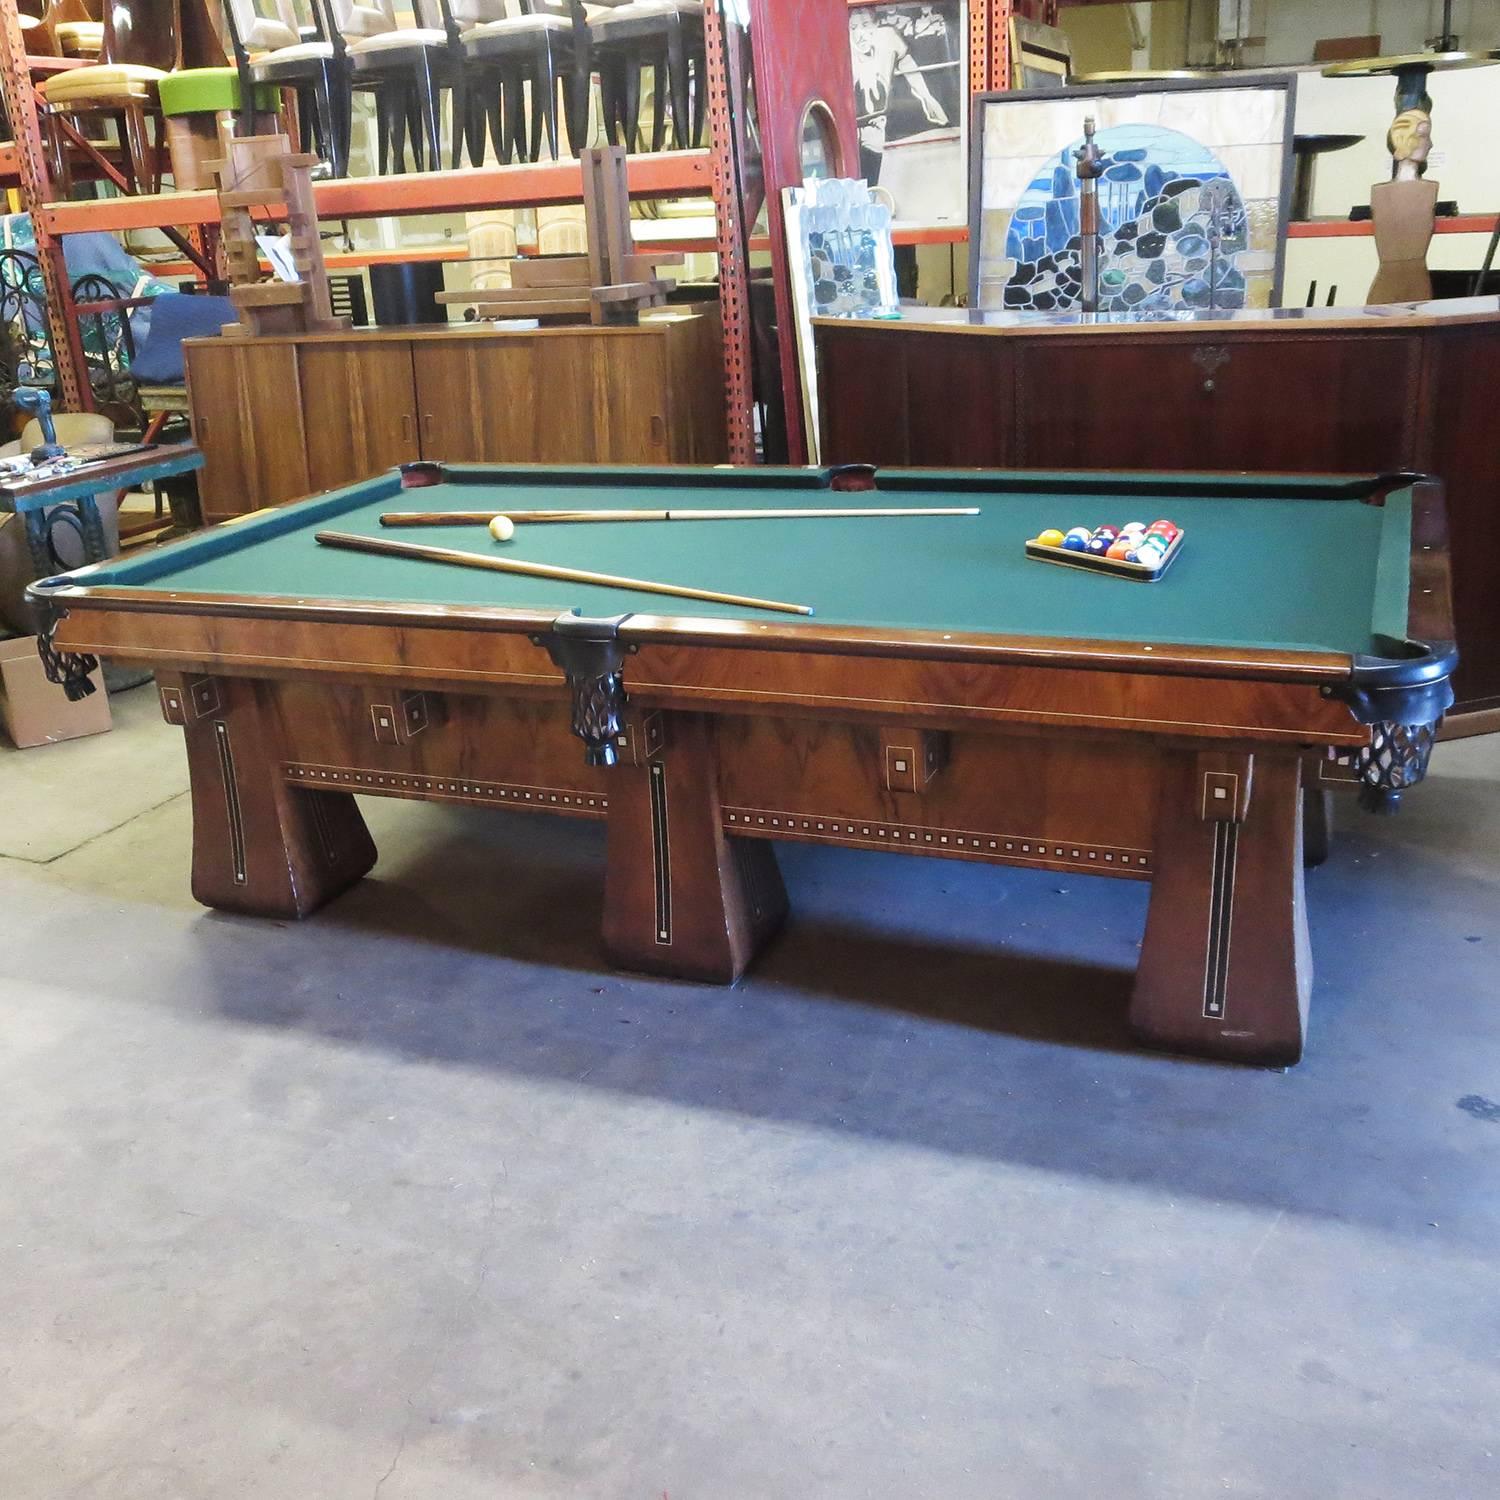 One of the finest pool tables ever created by the Brunswick Balke Collendar company was the Arcade model. The super deluxe version featured six legs instead of four, for extra stability and balance. These were considerably more expensive in the day,